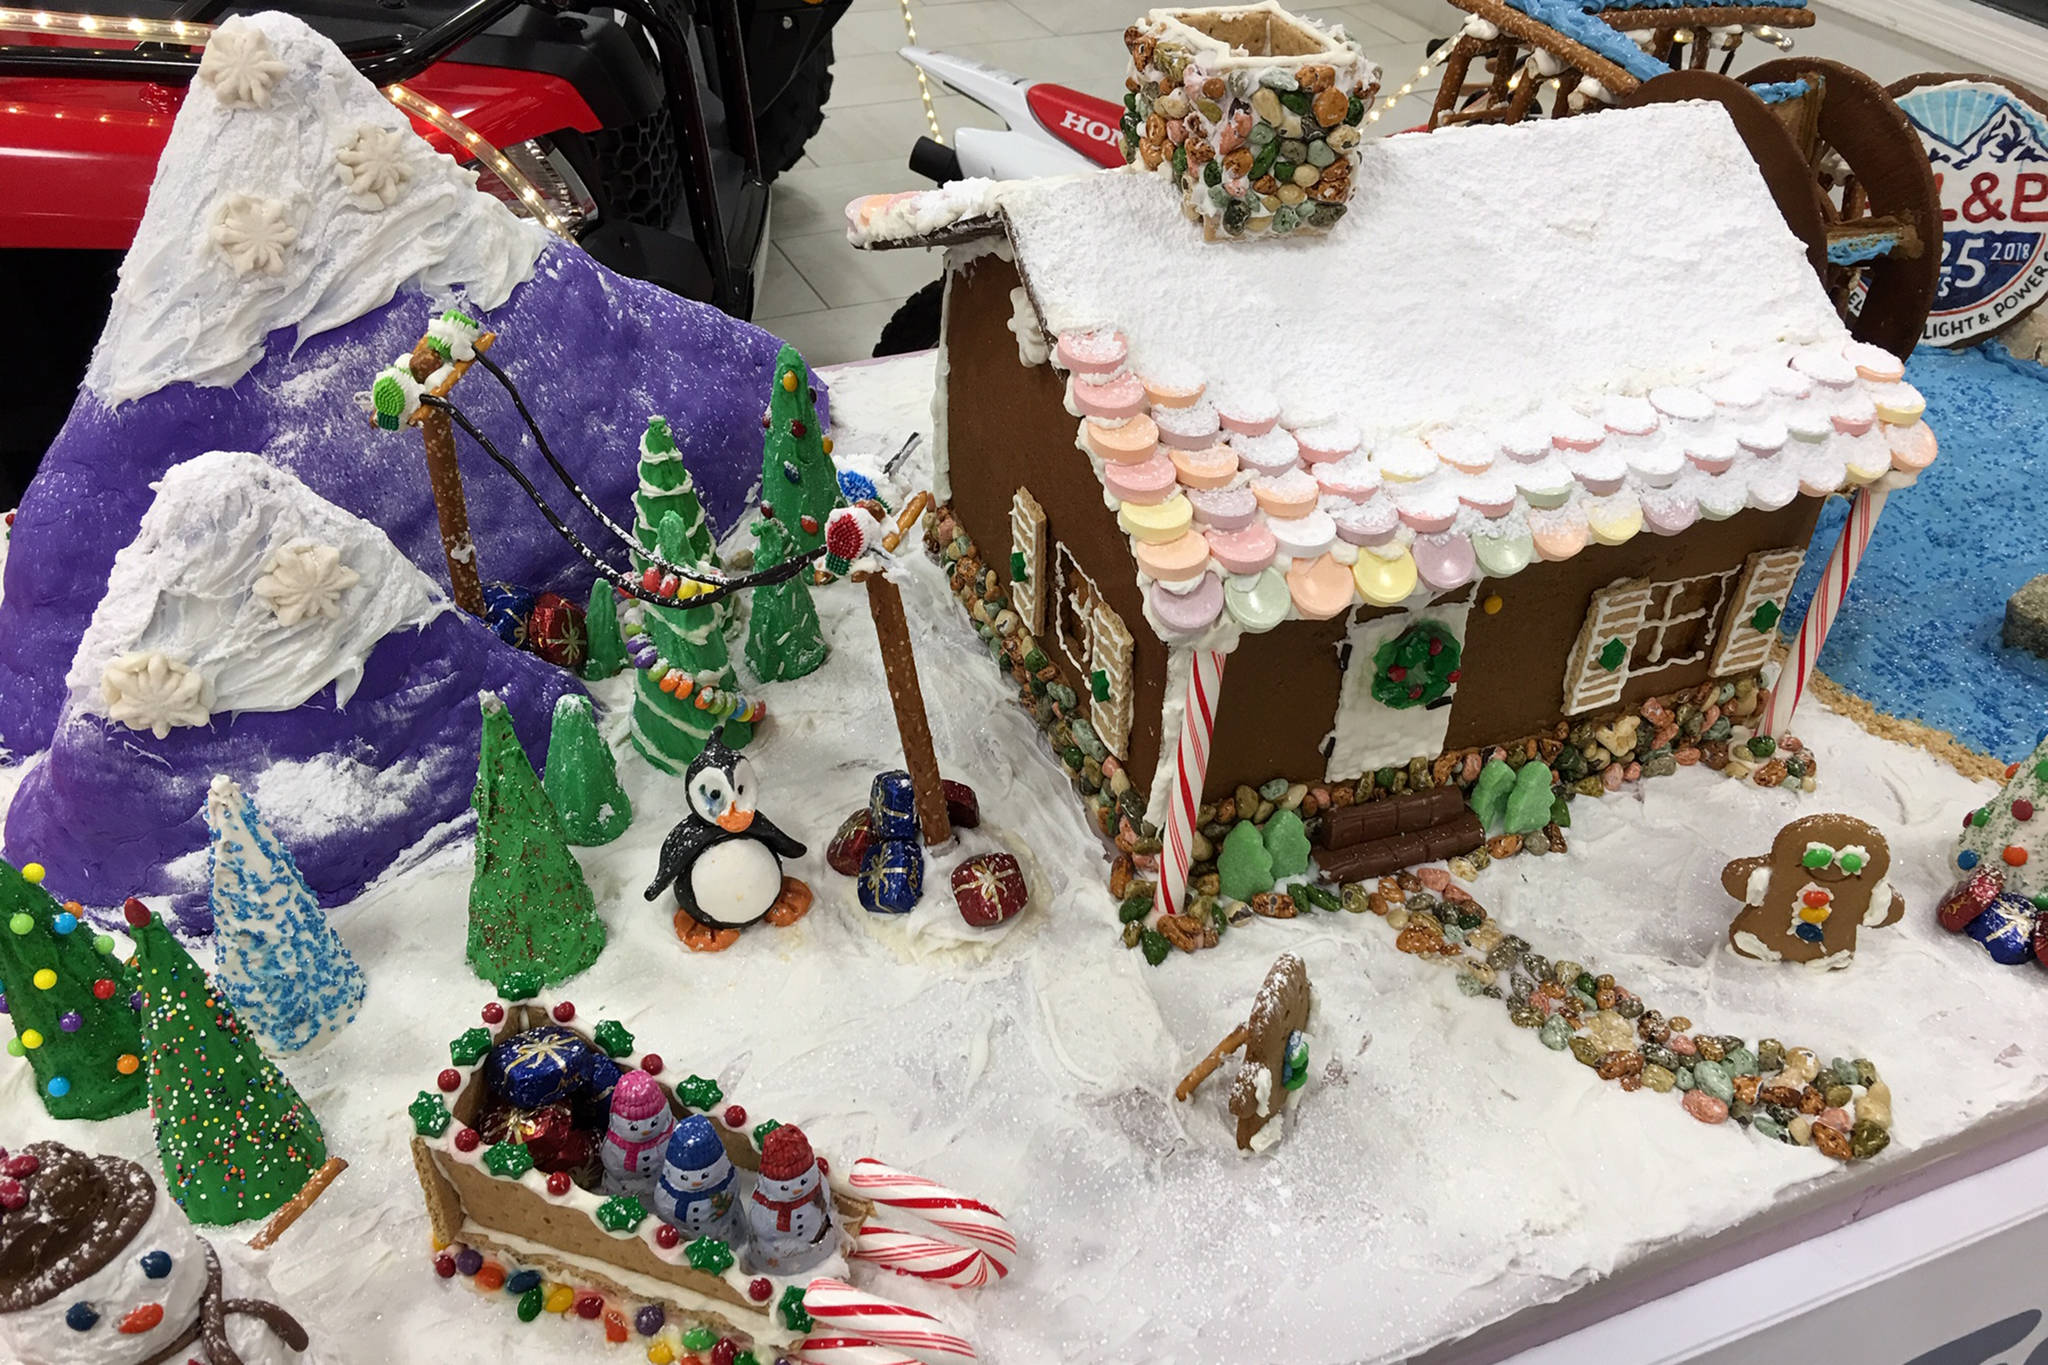 AEL&P made a gingerbread house that included a water wheel and a loaded slay. Ten businesses supporting 10 nonprofits made gingerbread structures for a fundraising contest that ended Wednesday, Dec. 19, 2018. (Courtesy Photo | Mendenhall Auto Center)